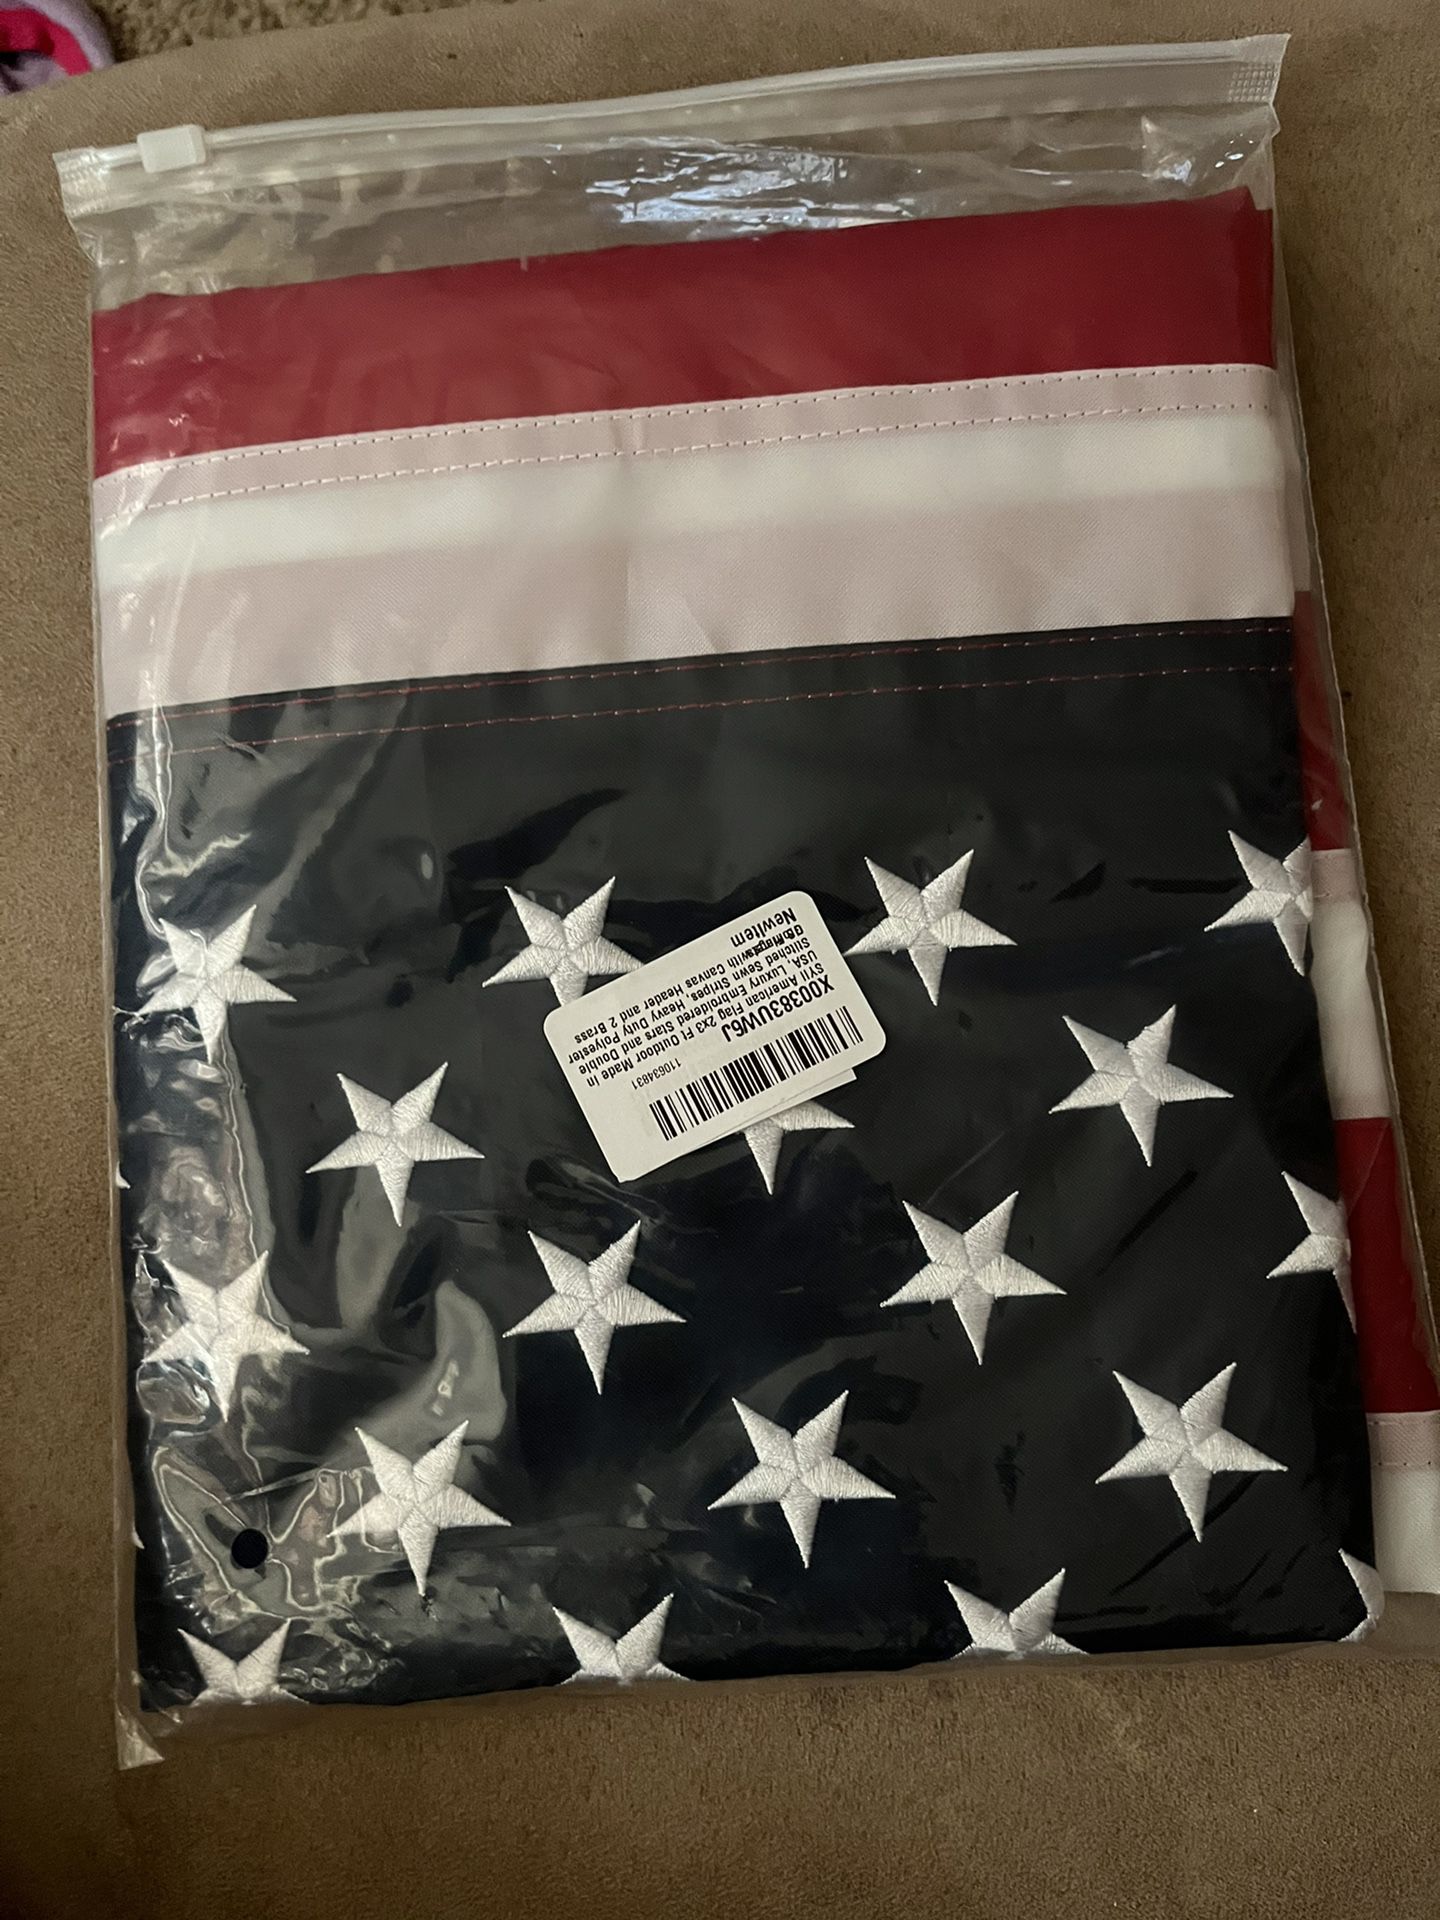 merican Flag 2x3 Ft Outdoor Made in USA, Luxury Embroidered Stars and Double Stitched Sewn Stripes, Heavy Duty Polyester US Flags with Canvas Header a